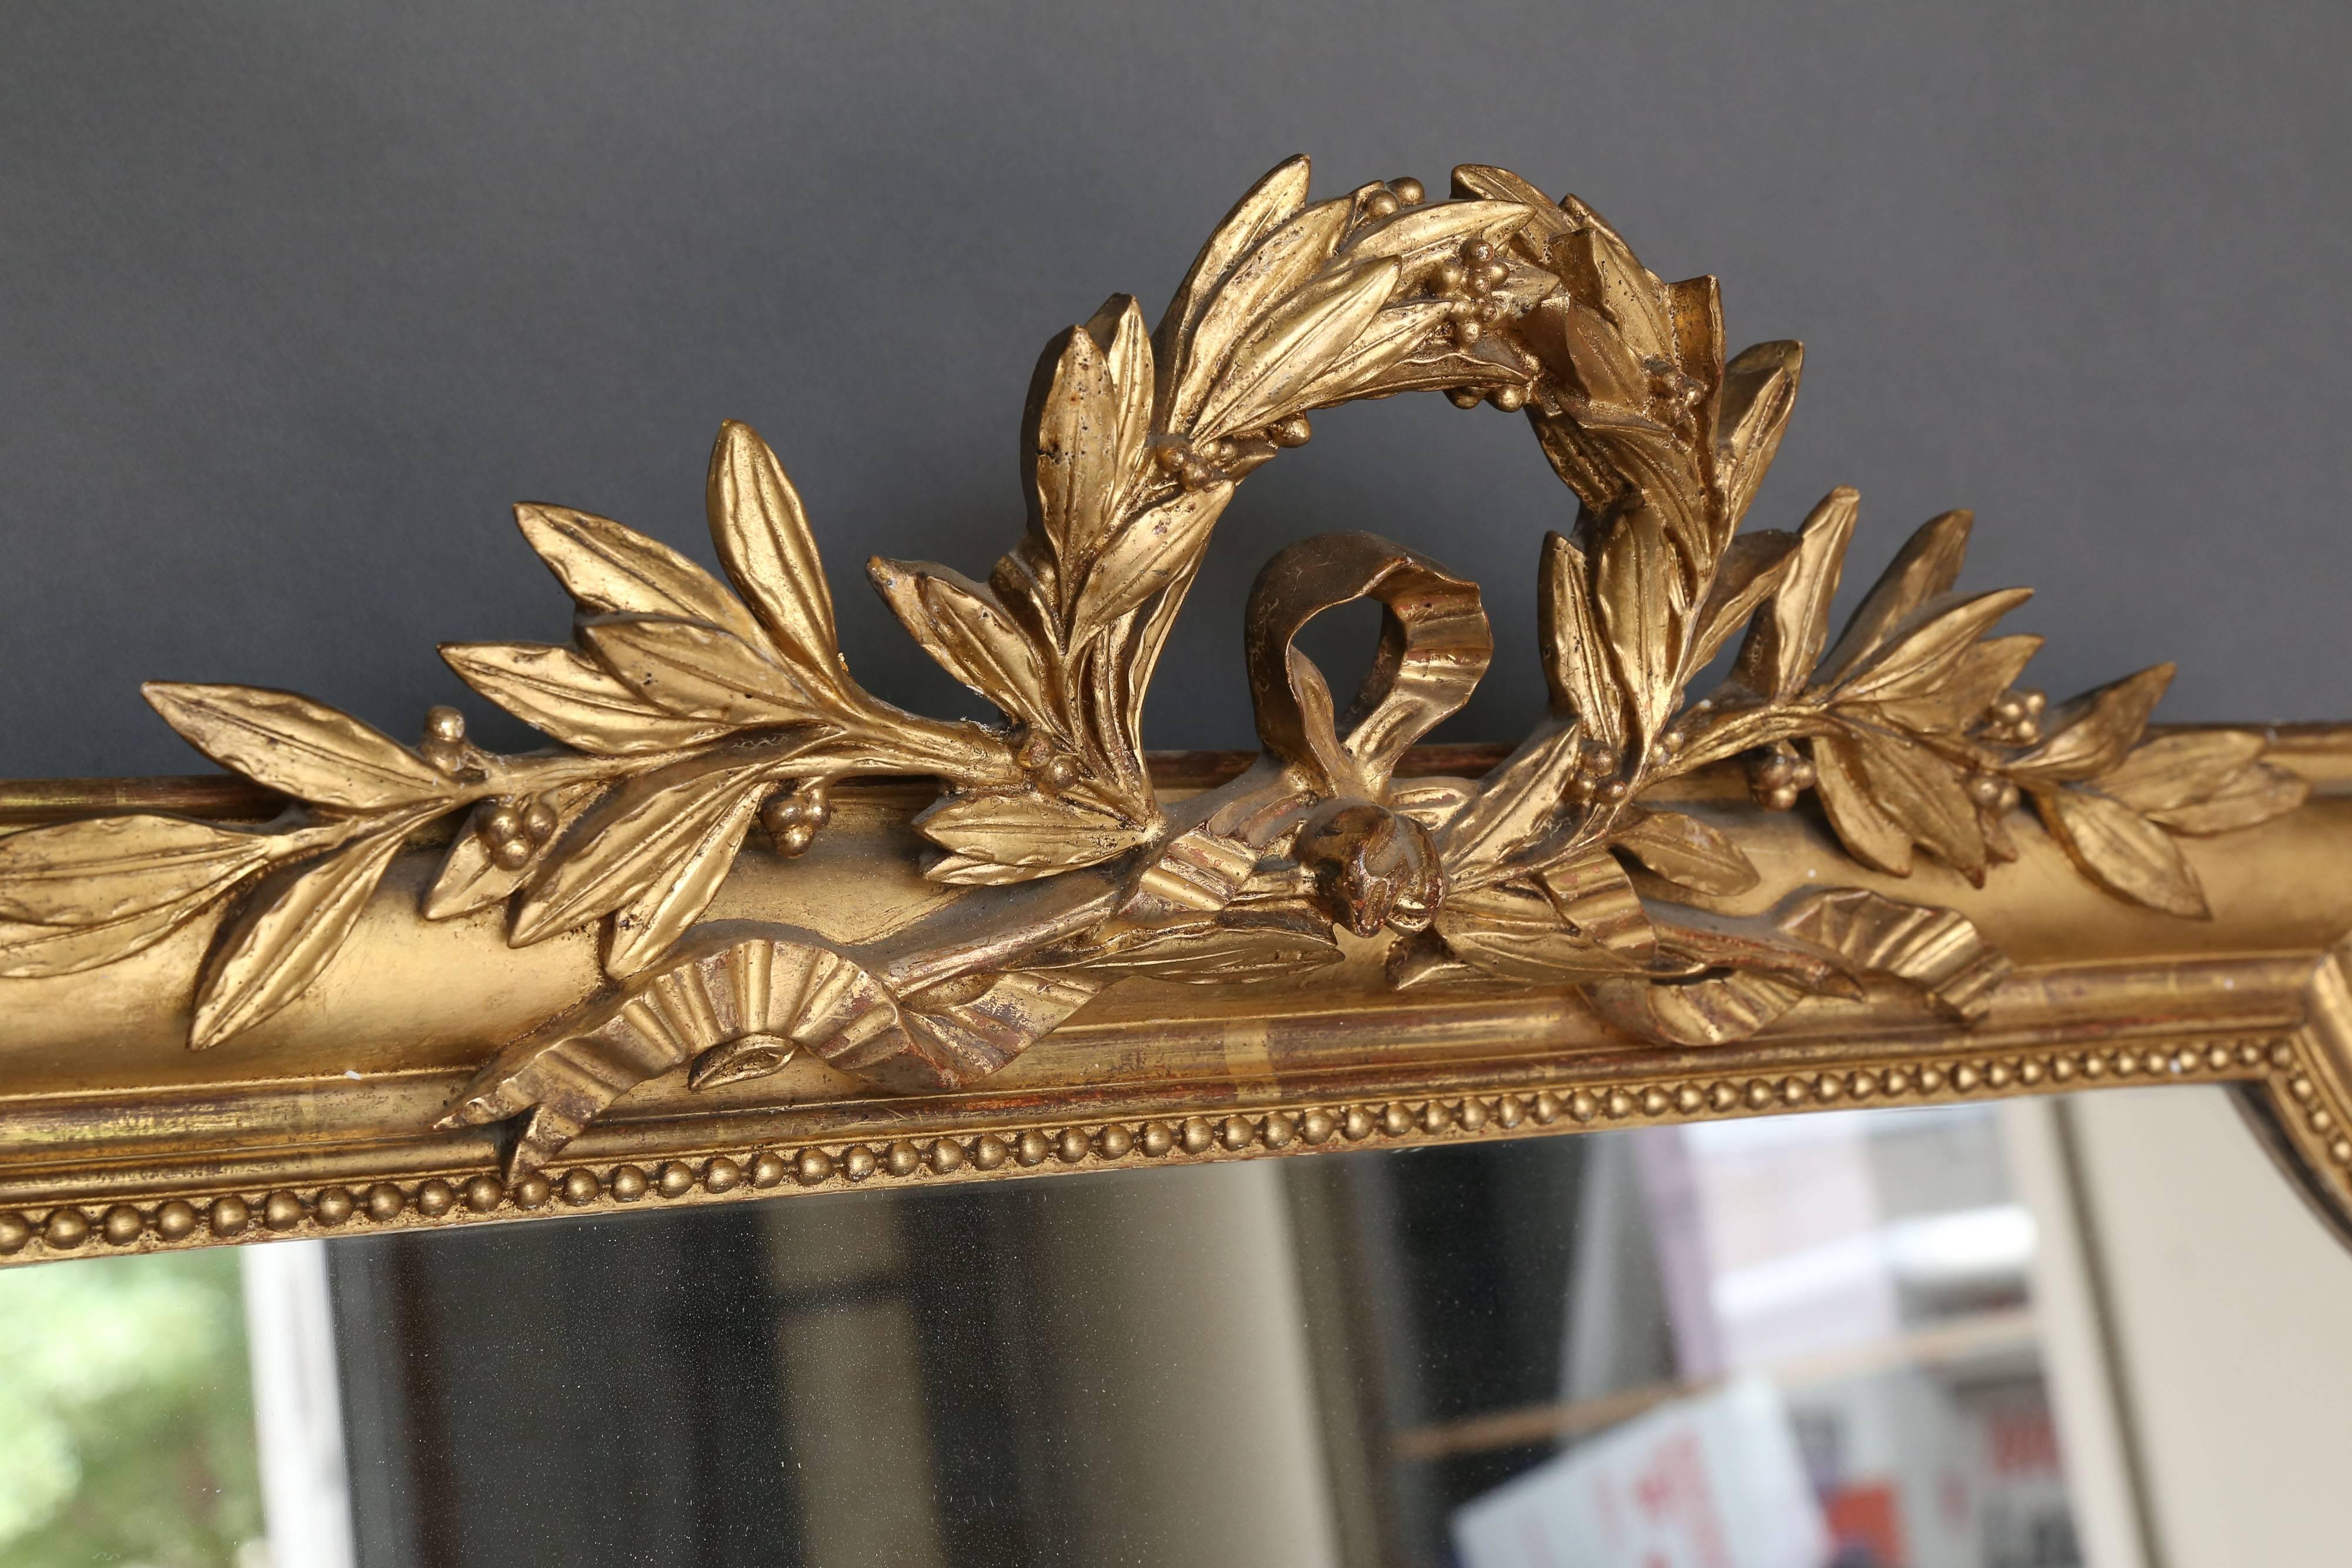 Large 19th century Directoire gilt mirror with crest of Laurel leaf couronne. Beautiful detail of pearl perimeter on the inside of gilt frame. Original mercury glass. Great patina, circa 1860.